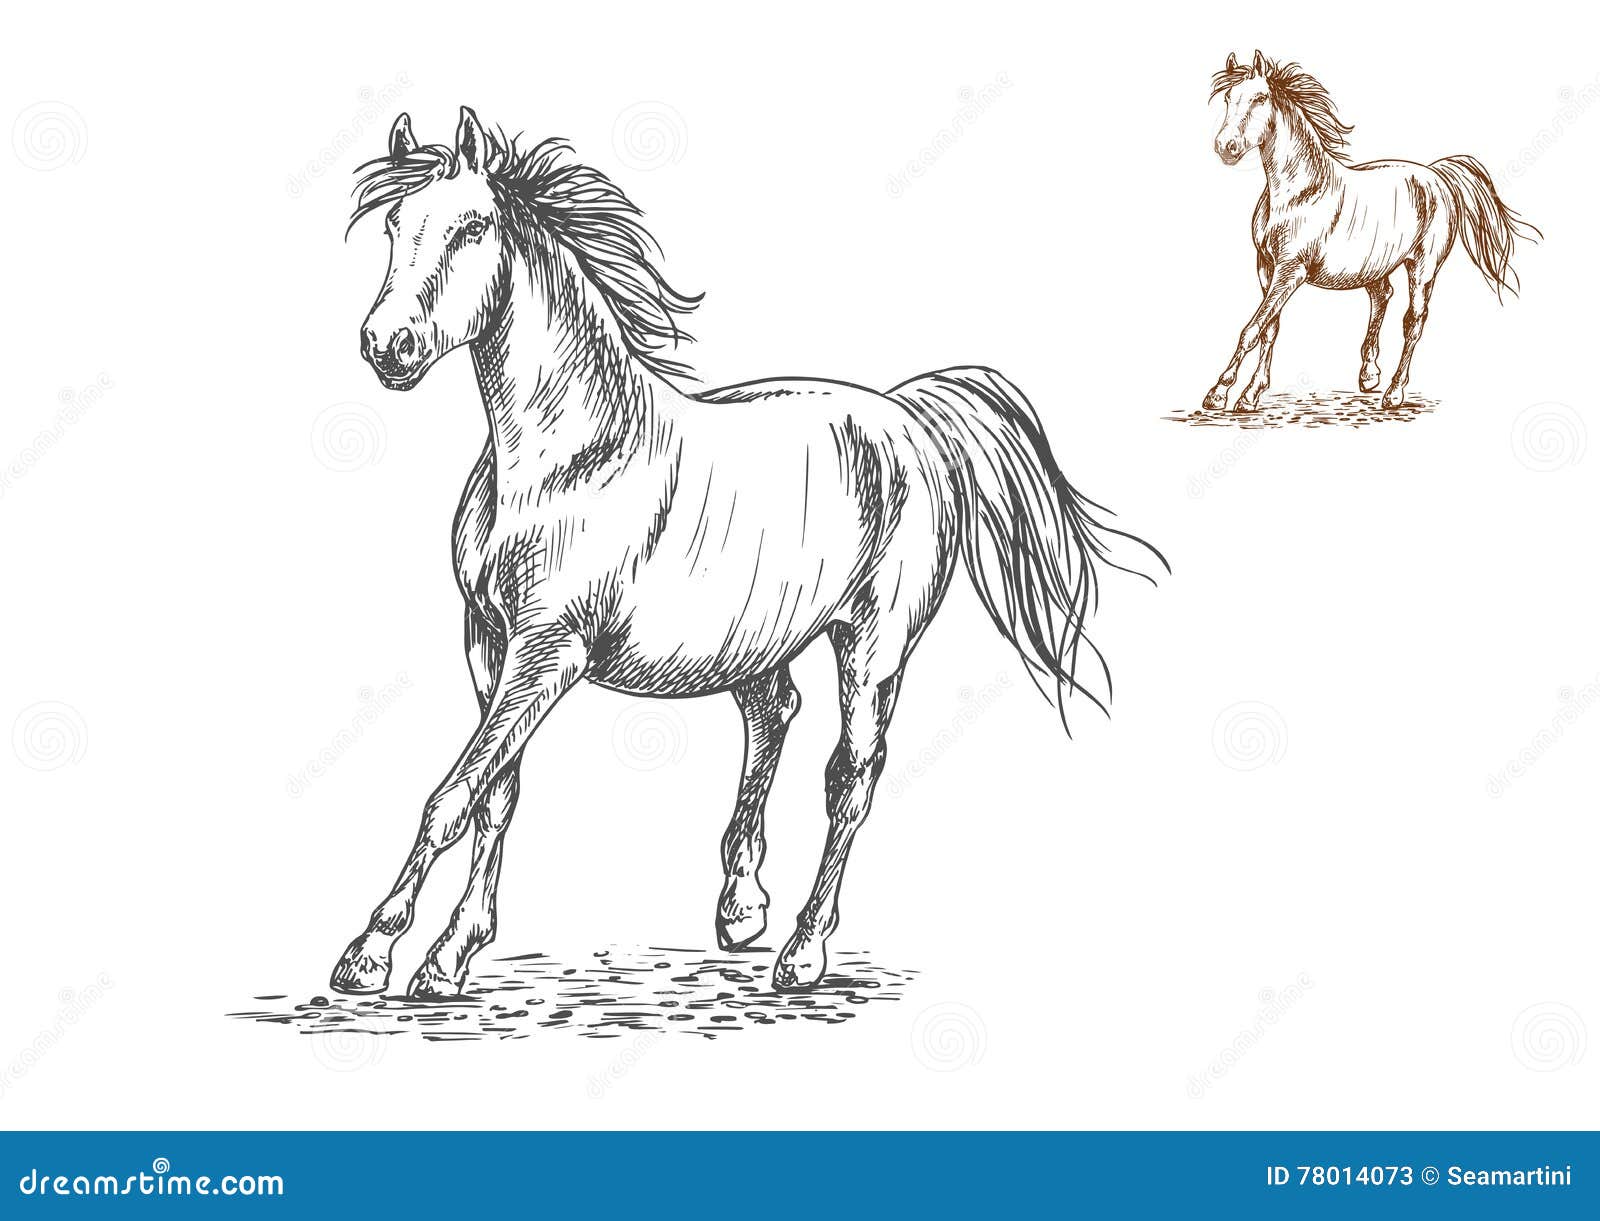 Horse Galloping Sketch Portrait Stock Vector - Illustration of artistic